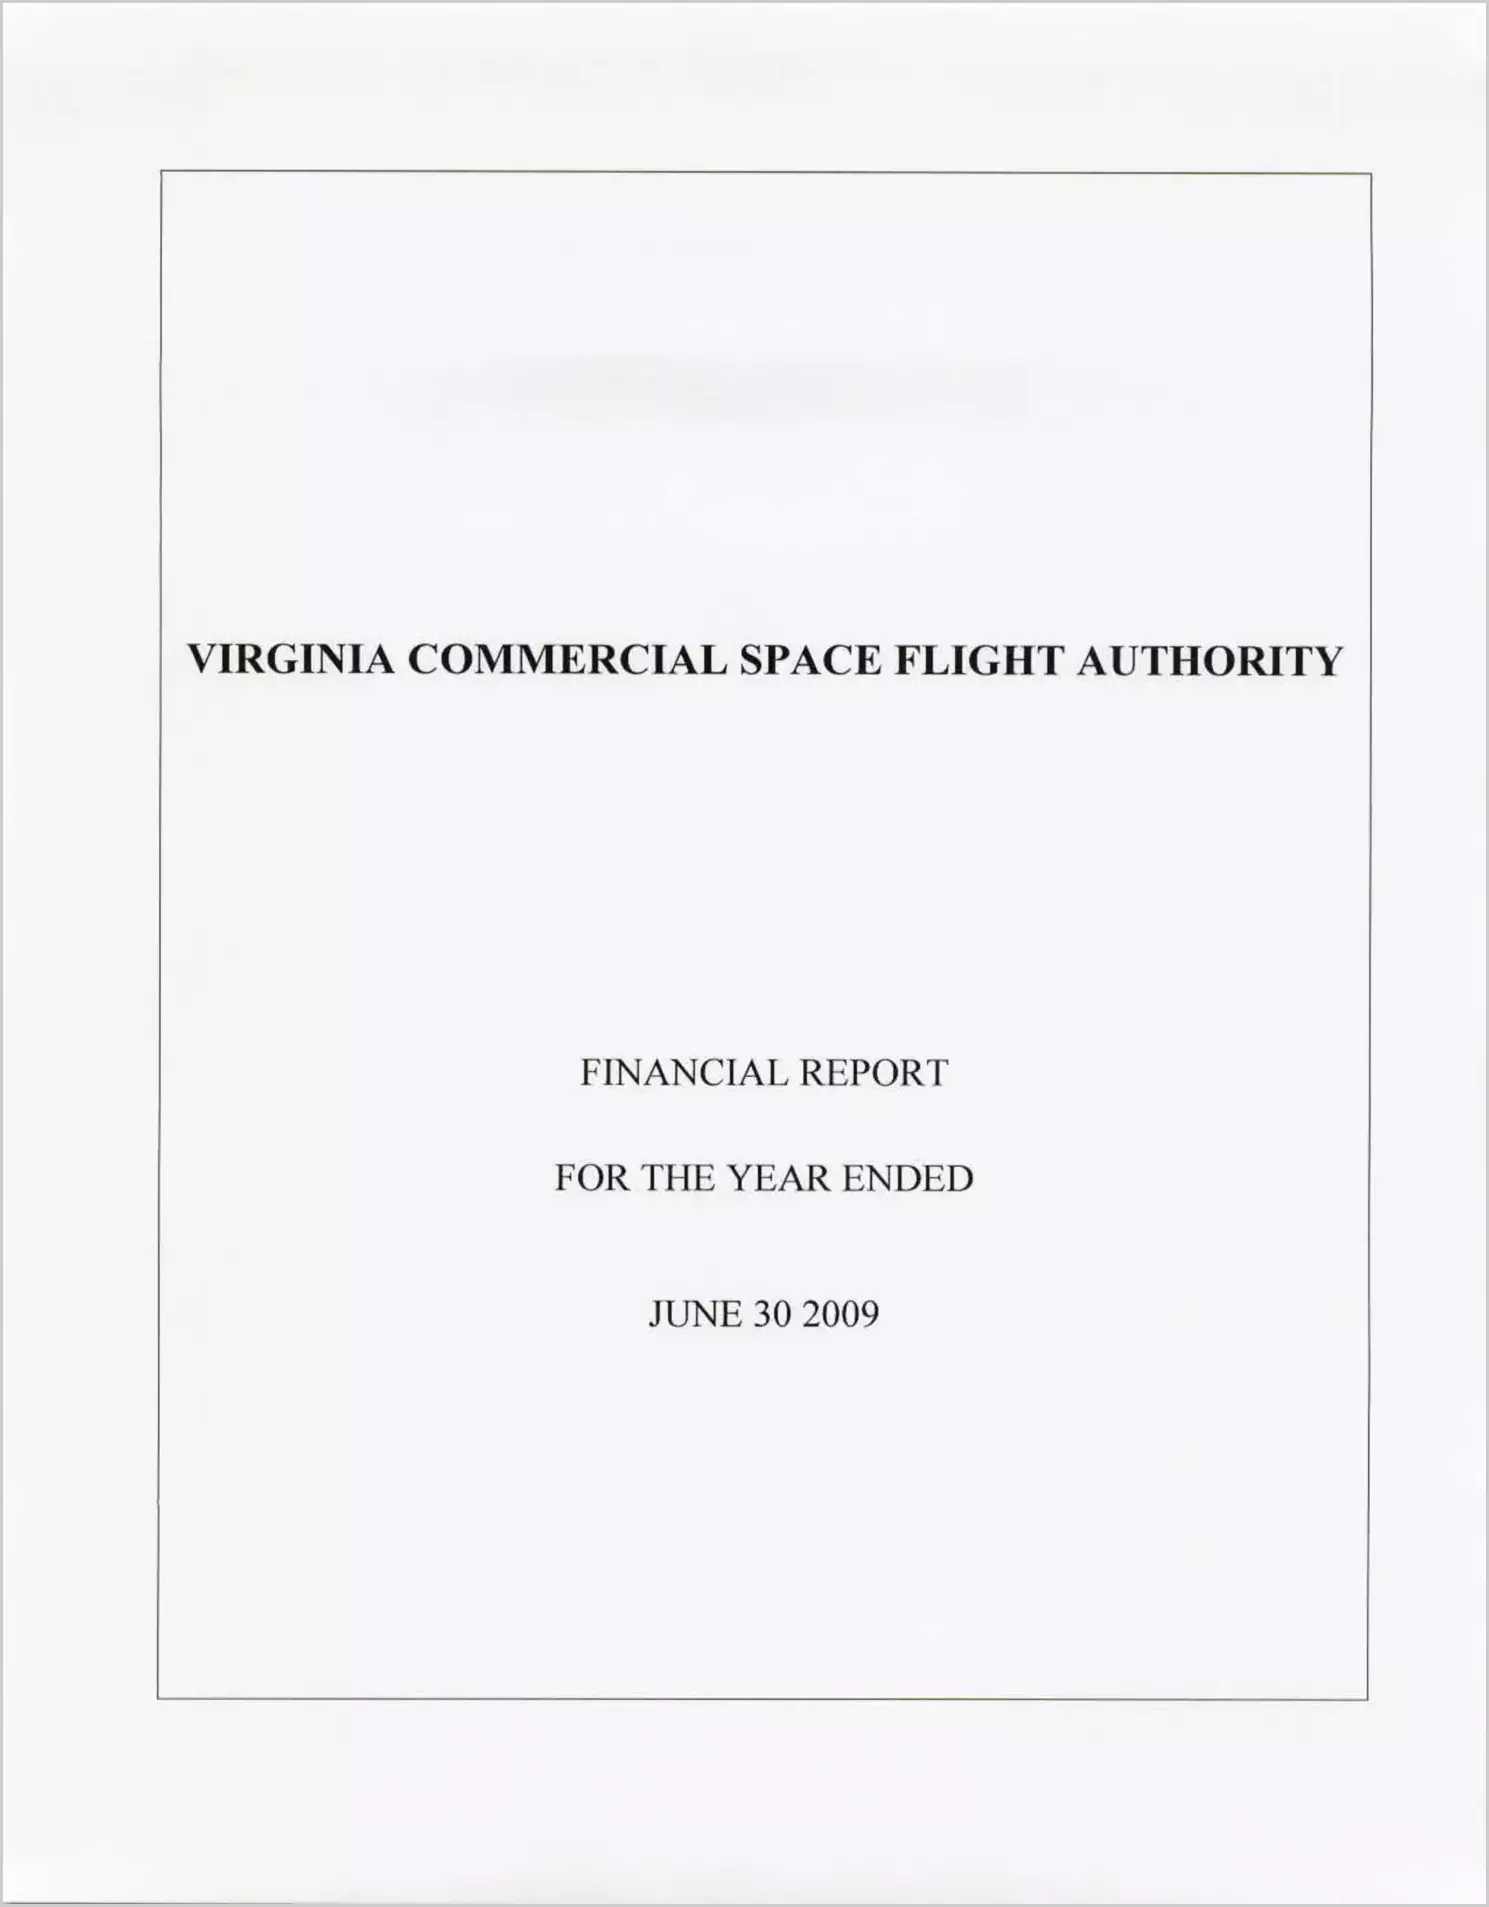 Virginia Commercial Space Flight Authority Financial Report for the year ended June 30, 2009